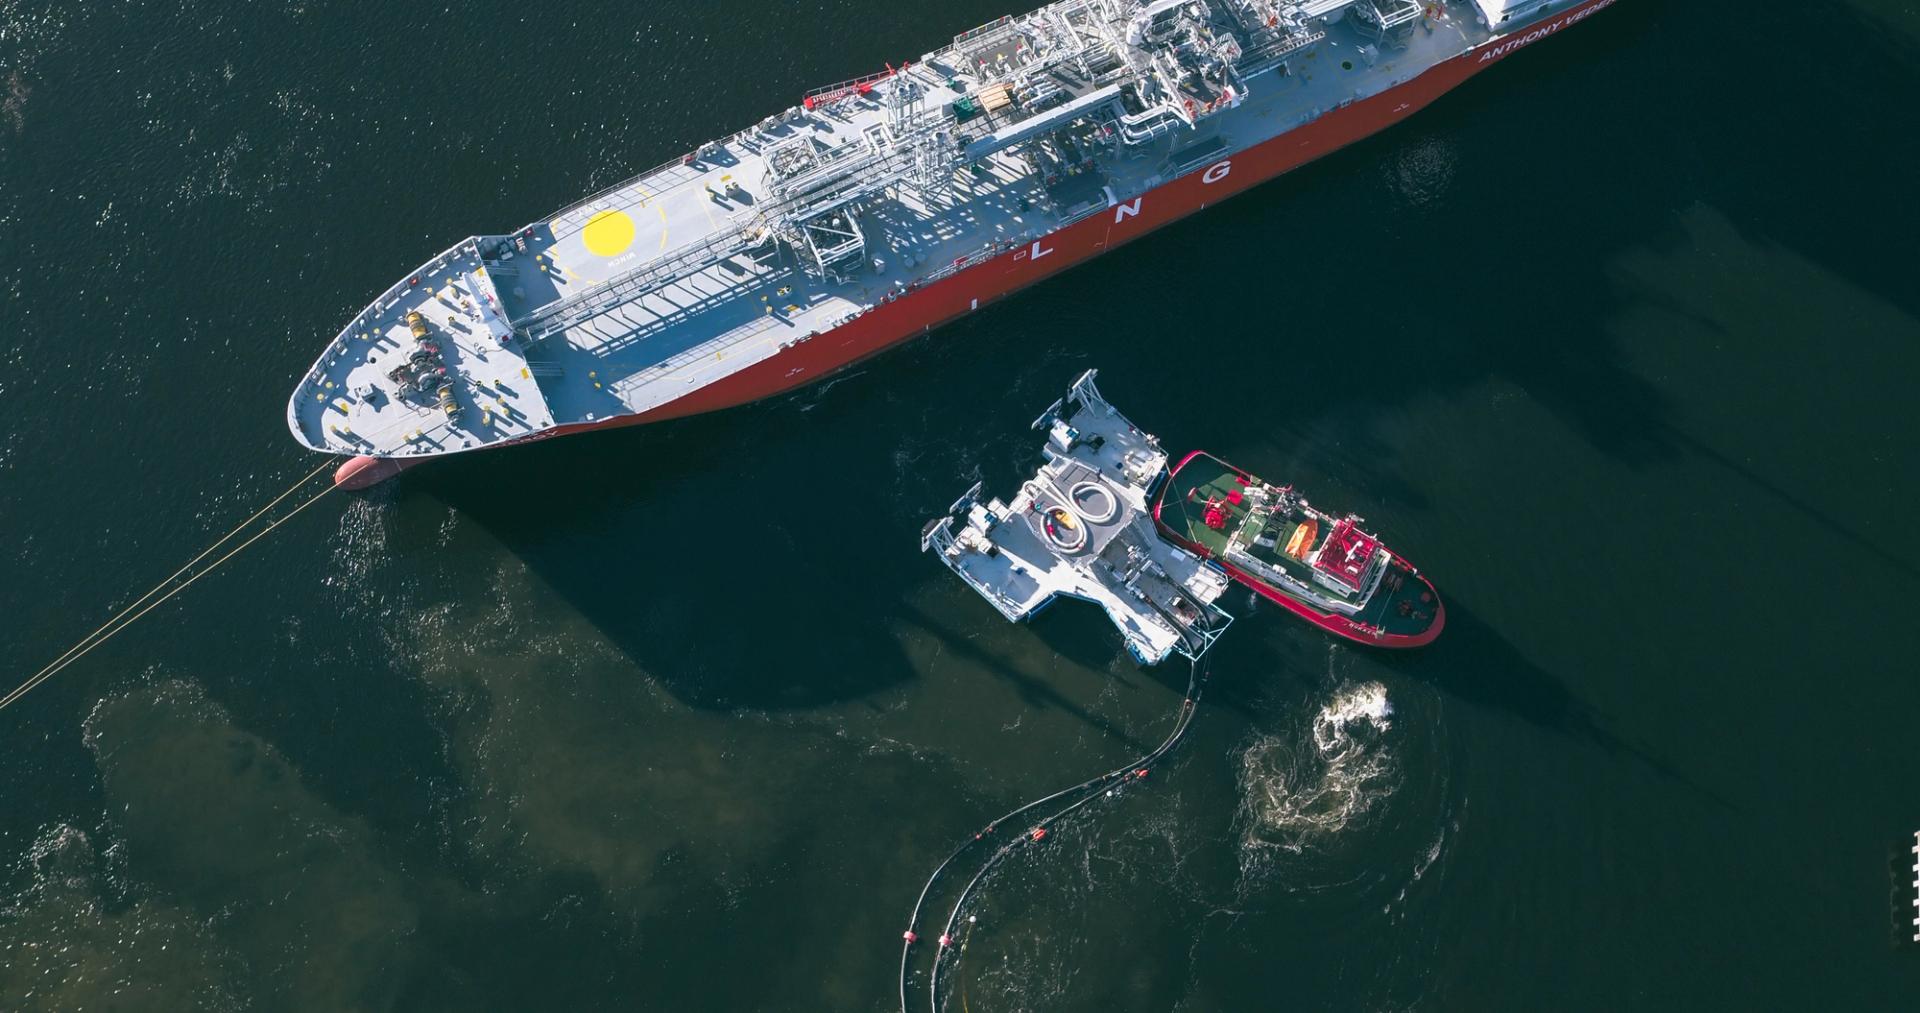 ECOnnect enables fast-track energy project through jettyless marine transfer solutions